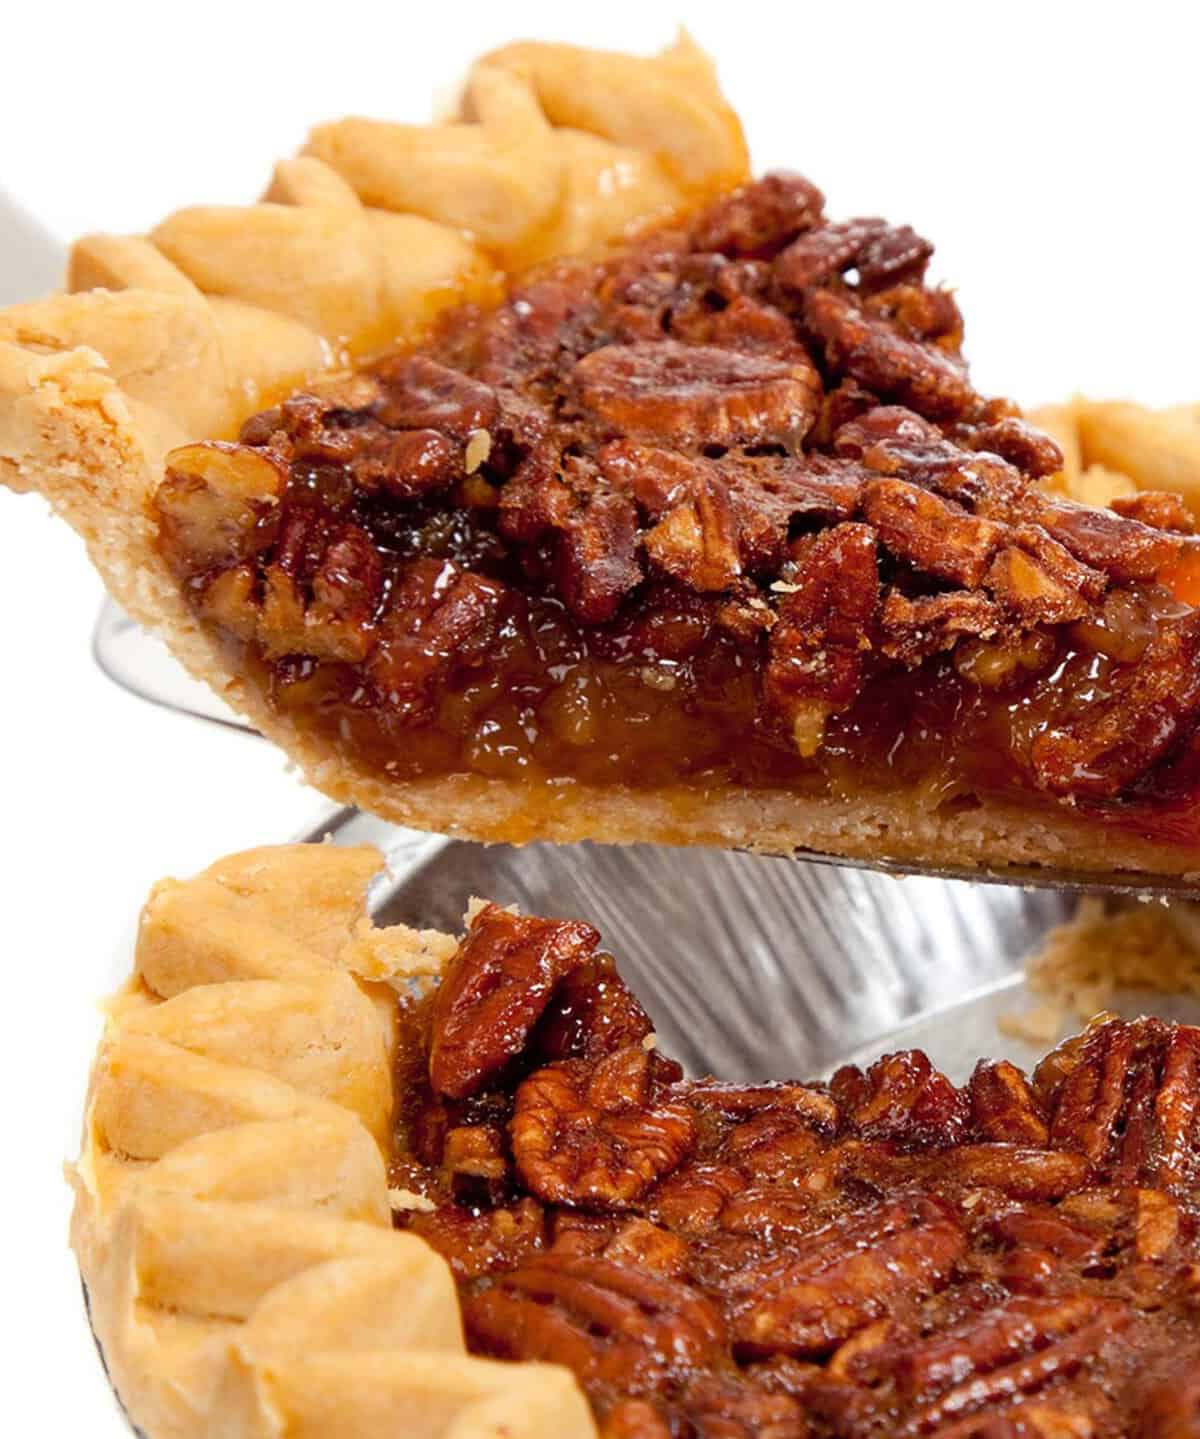  Pecan pie is the quintessential comfort food and my signature recipe is bound to impress.